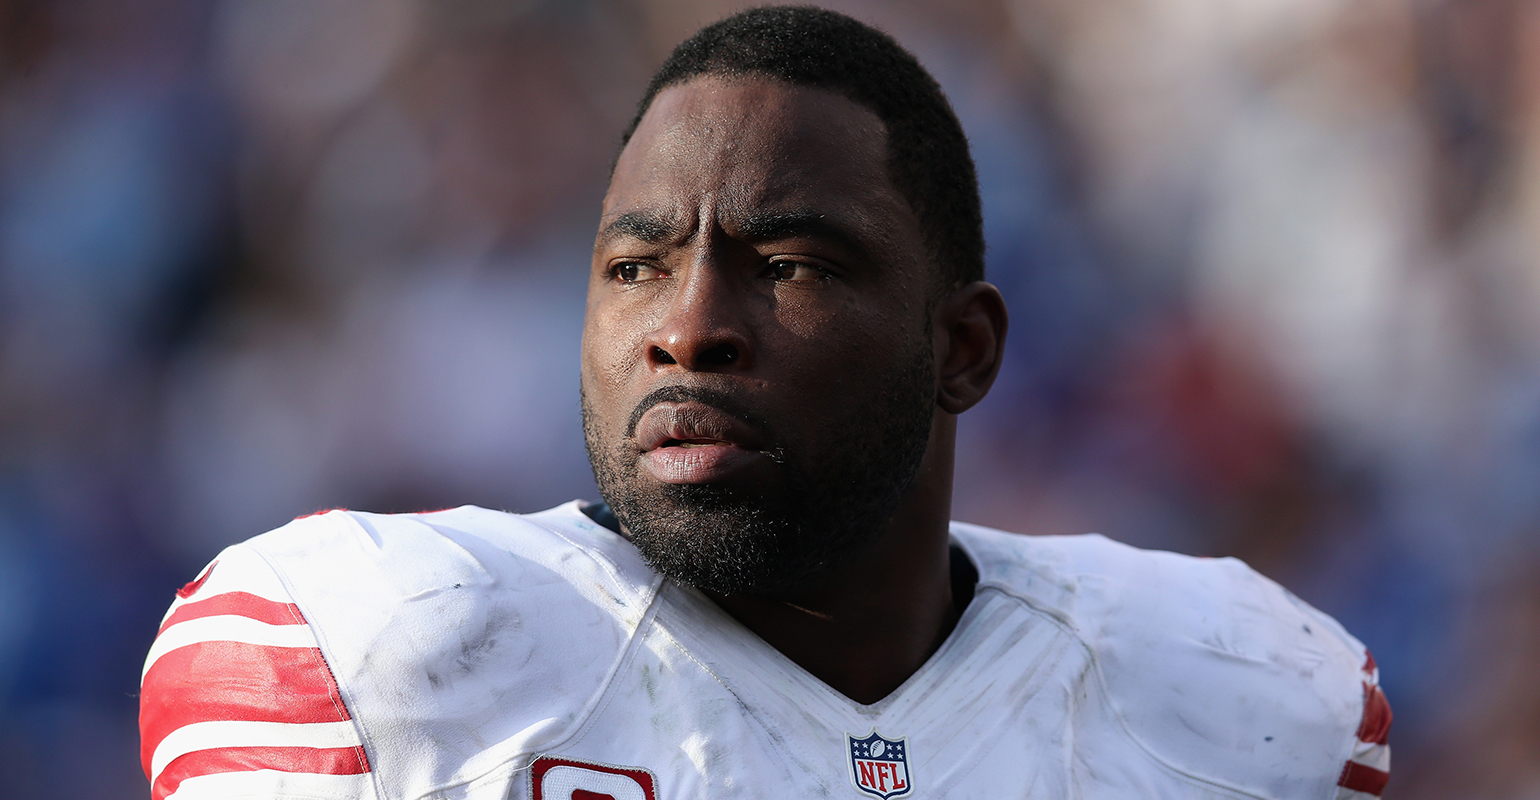 Justin Tuck Is Now a Goldman Sachs VP | Wealth Management